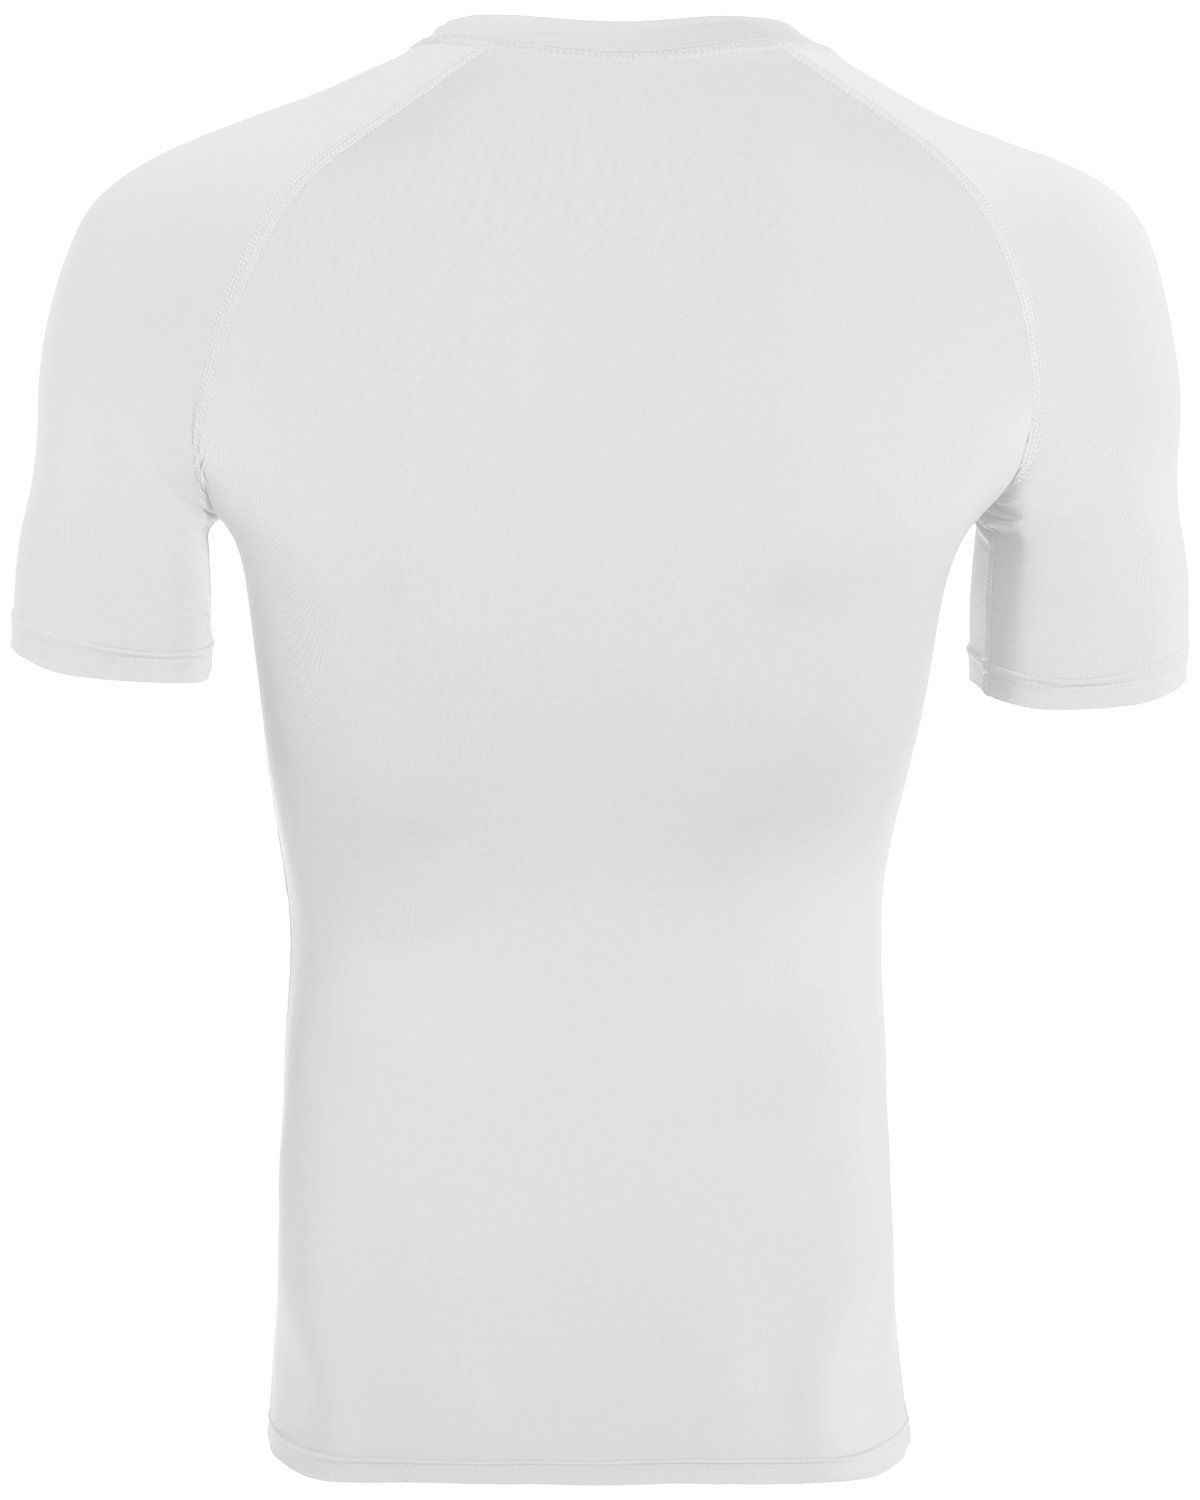 'Augusta 2601 Youth Hyperform Compression Short Sleeve Shirt'